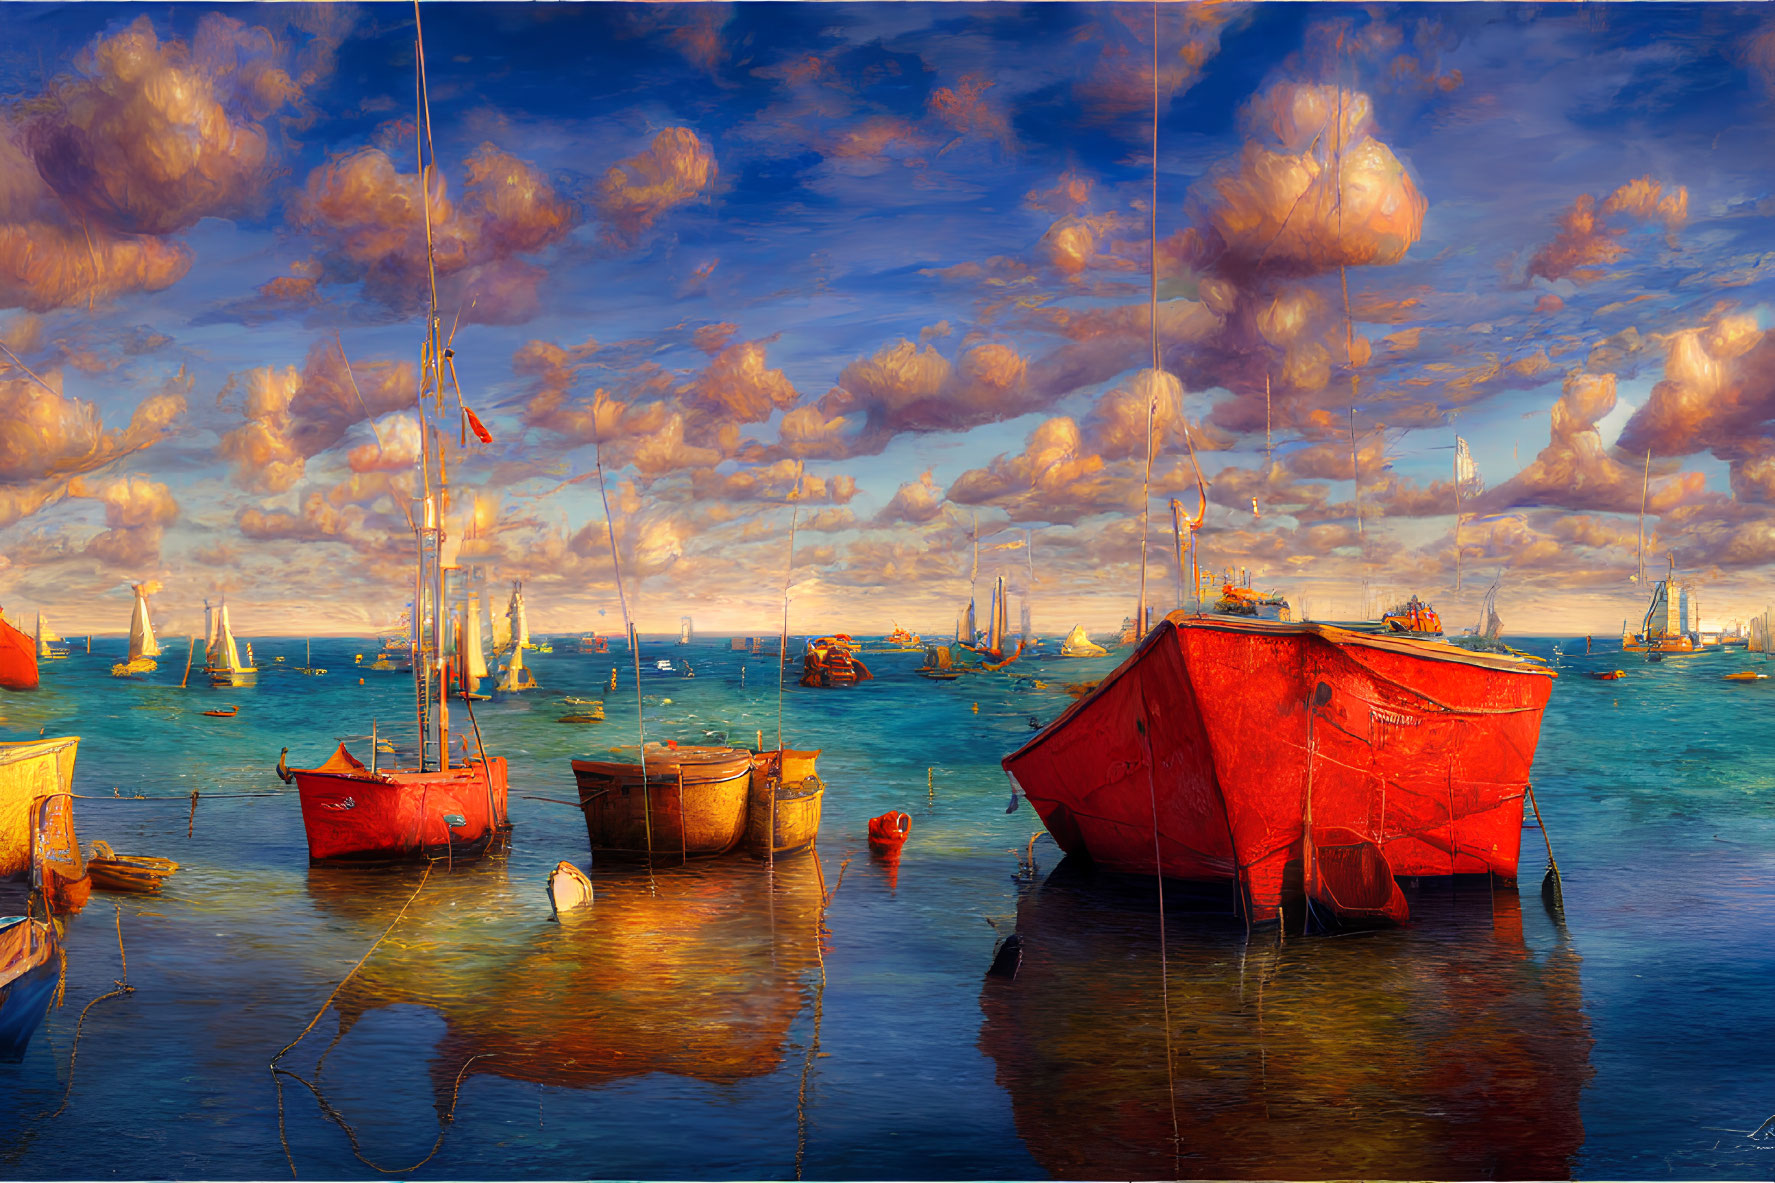 Red boats on calm waters with fluffy clouds at sunset